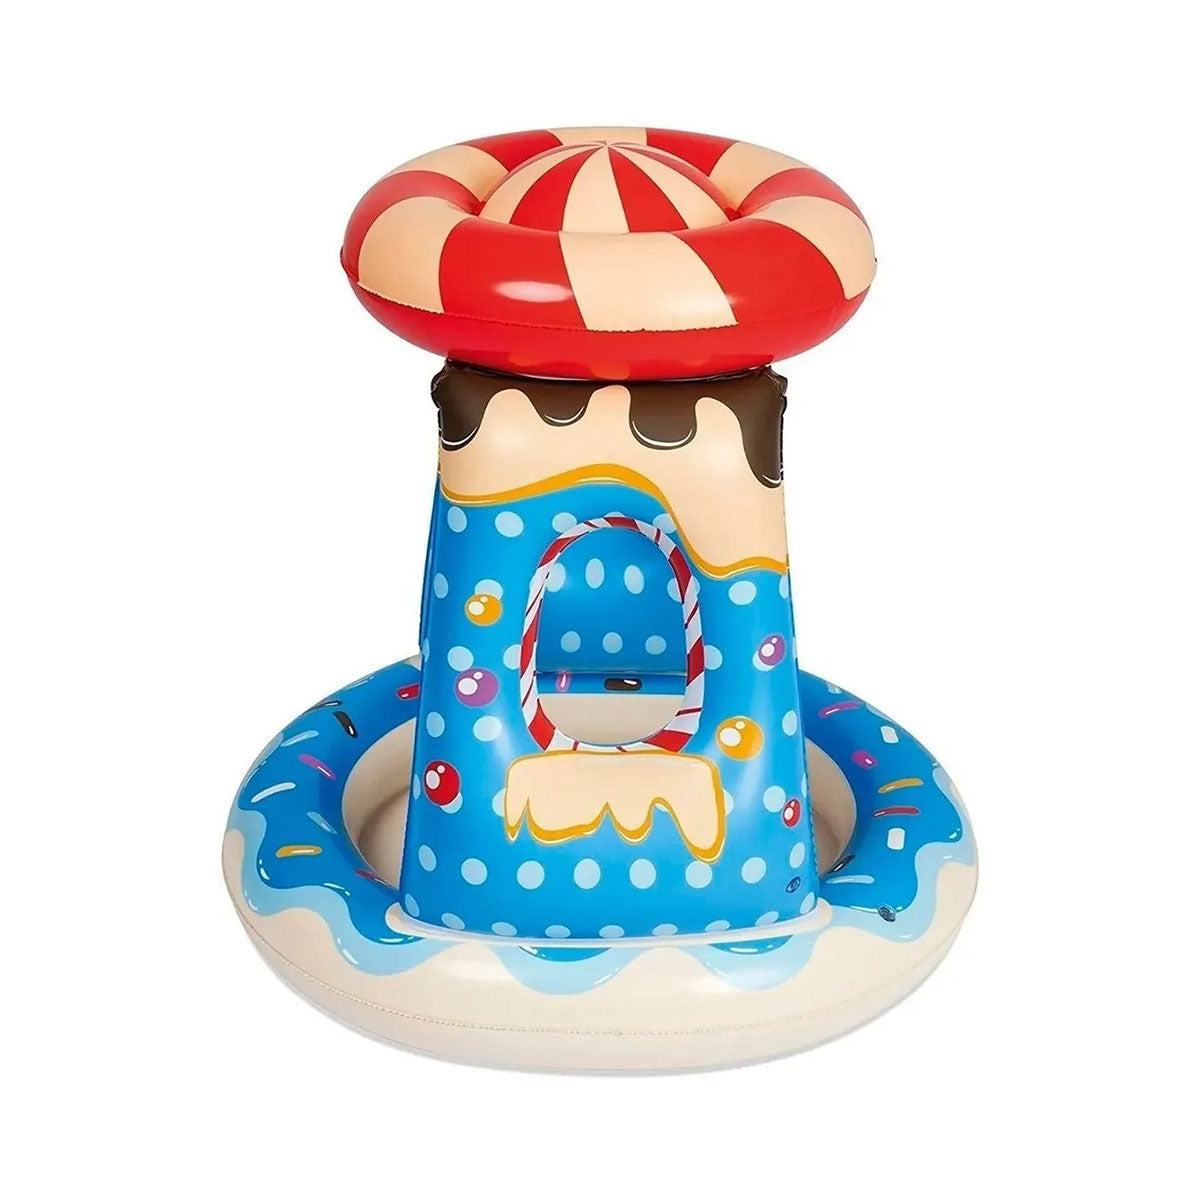 Bestway - Candyville Inflatable Pool